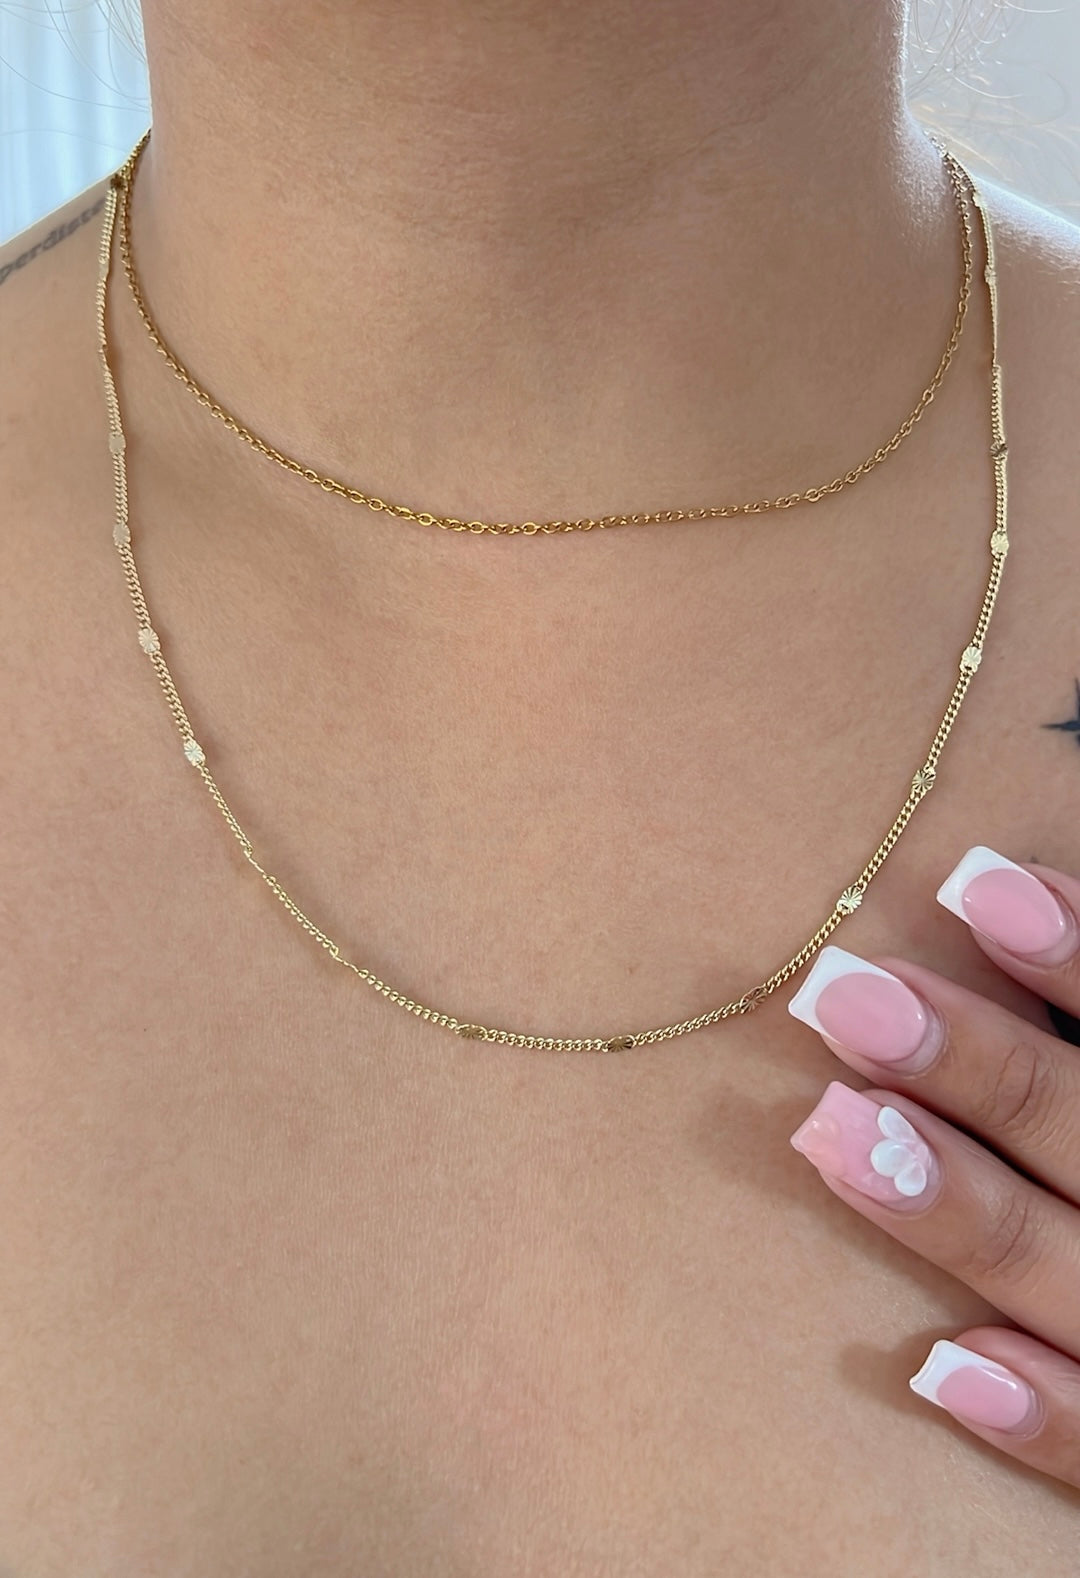 Hammered Chain Necklace: 21 inches